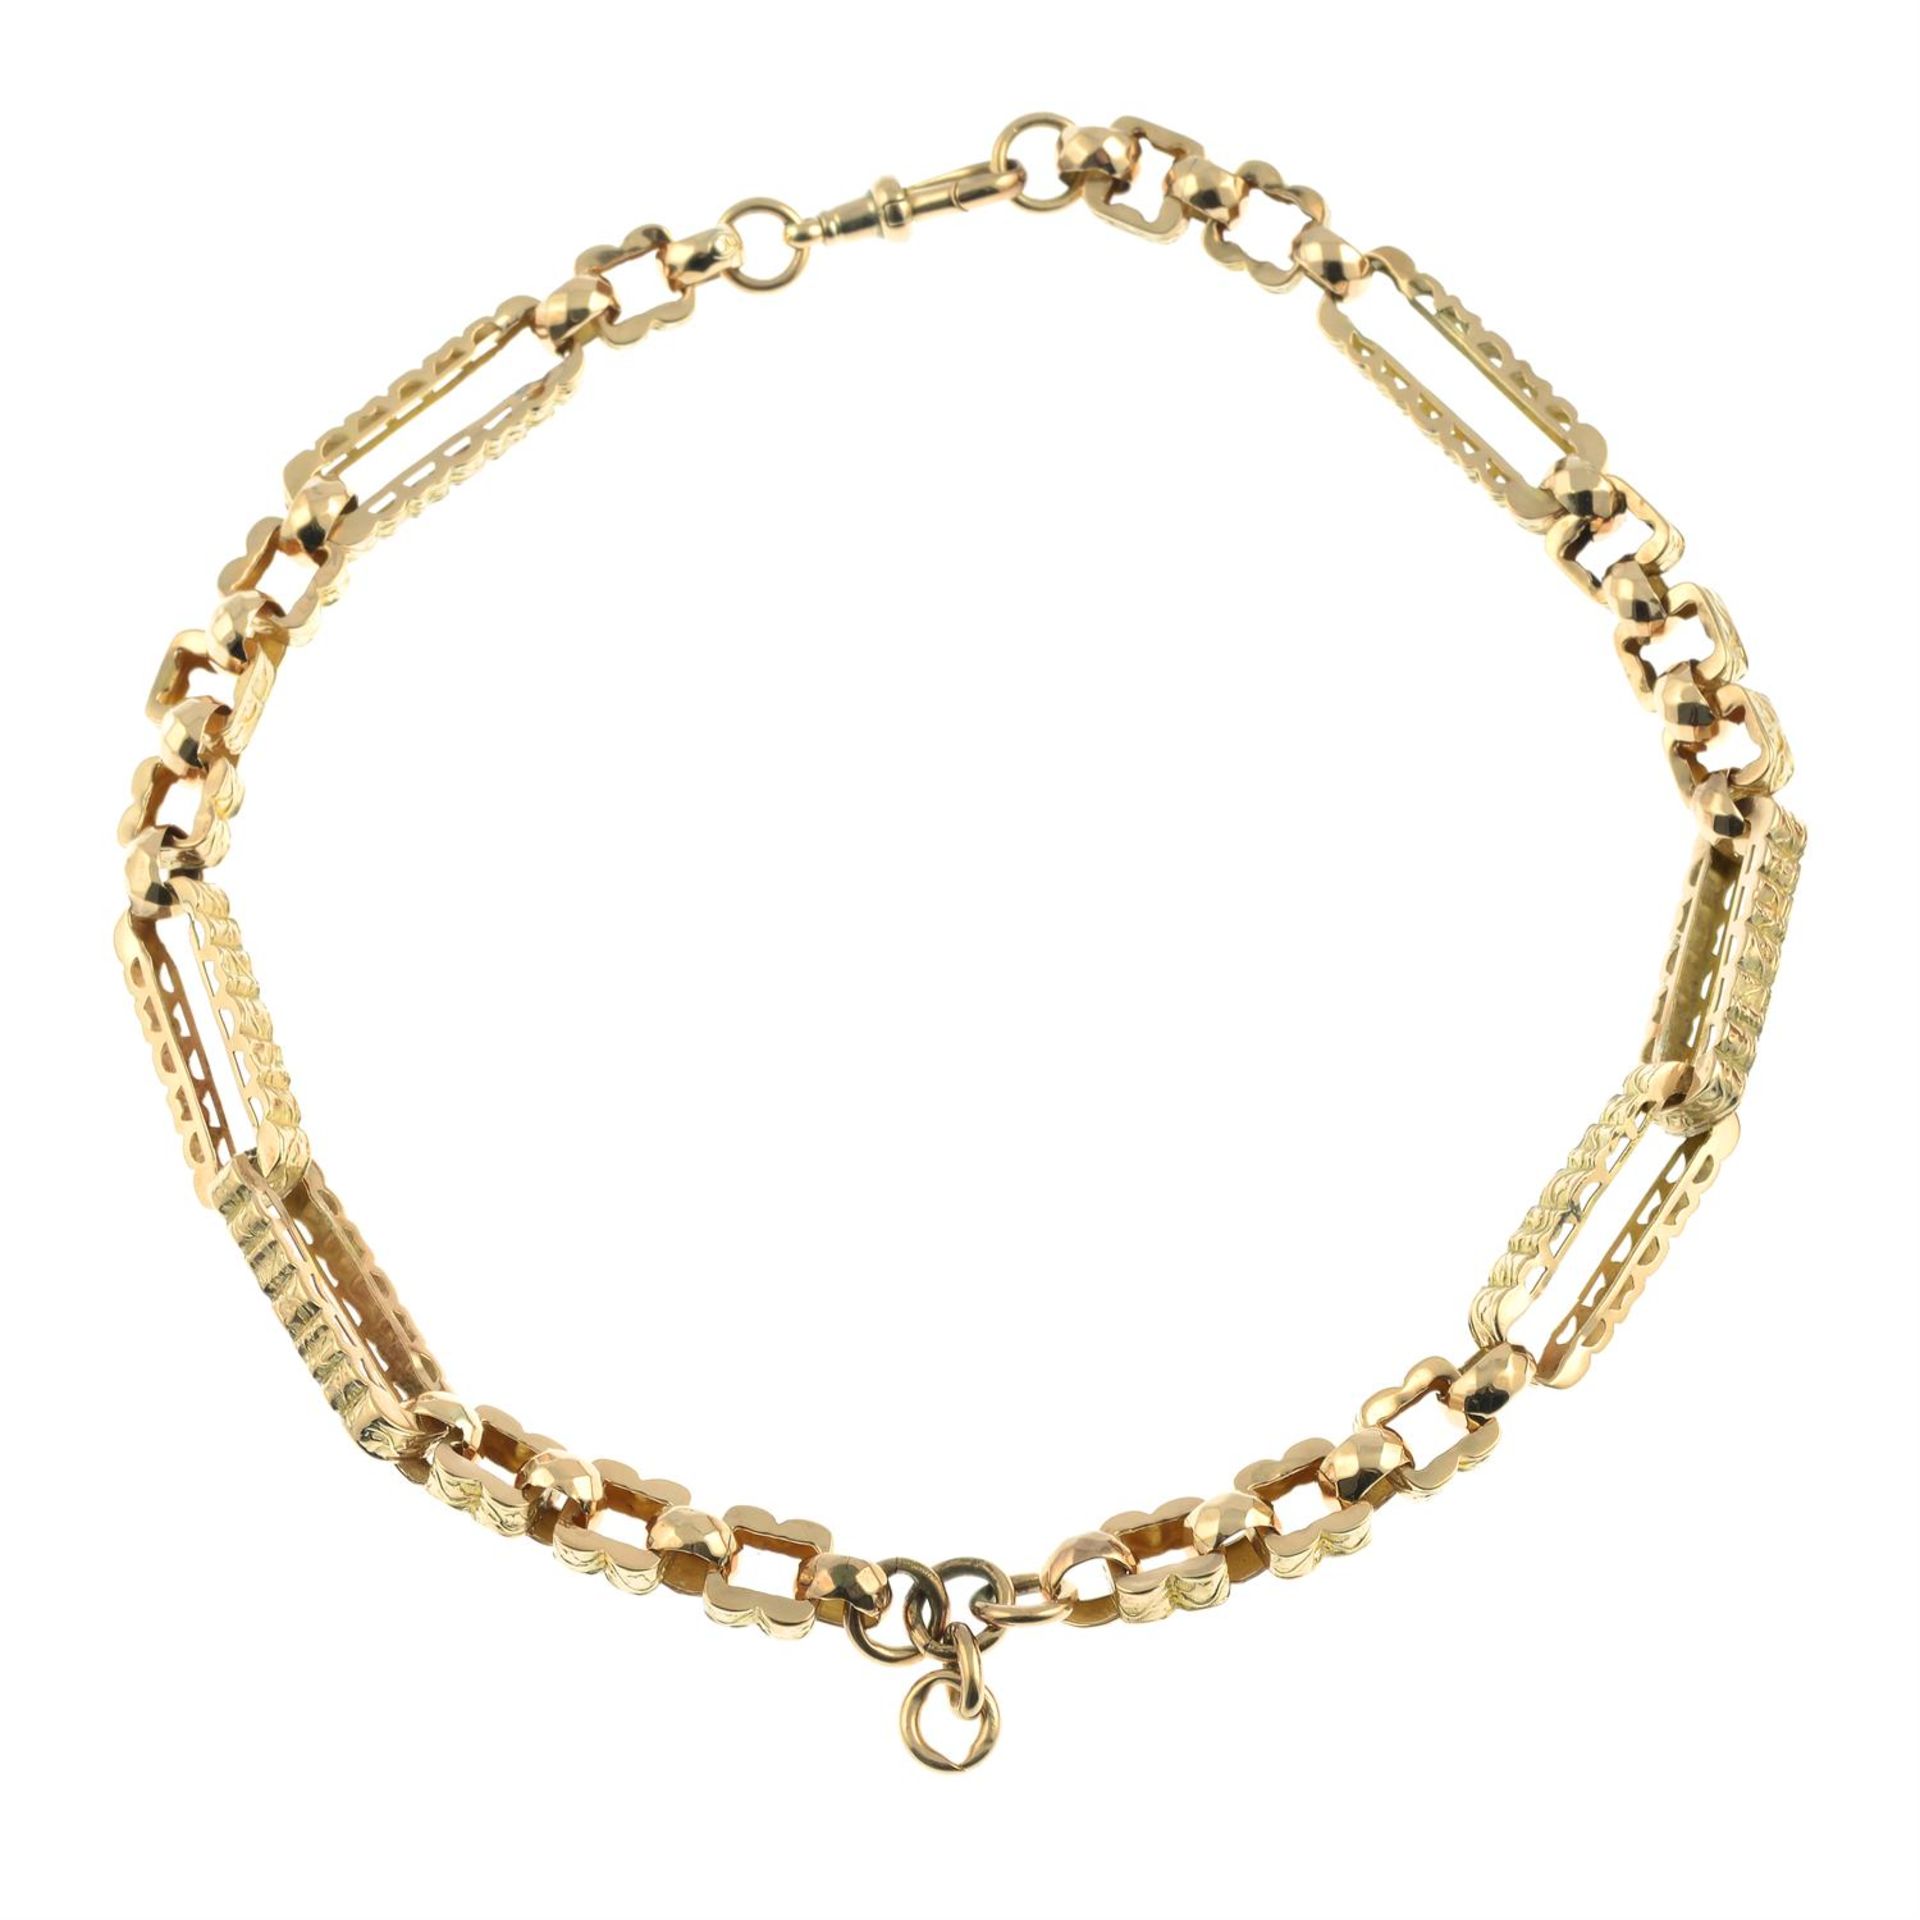 A late 19th century 9ct gold fancy-link chain.